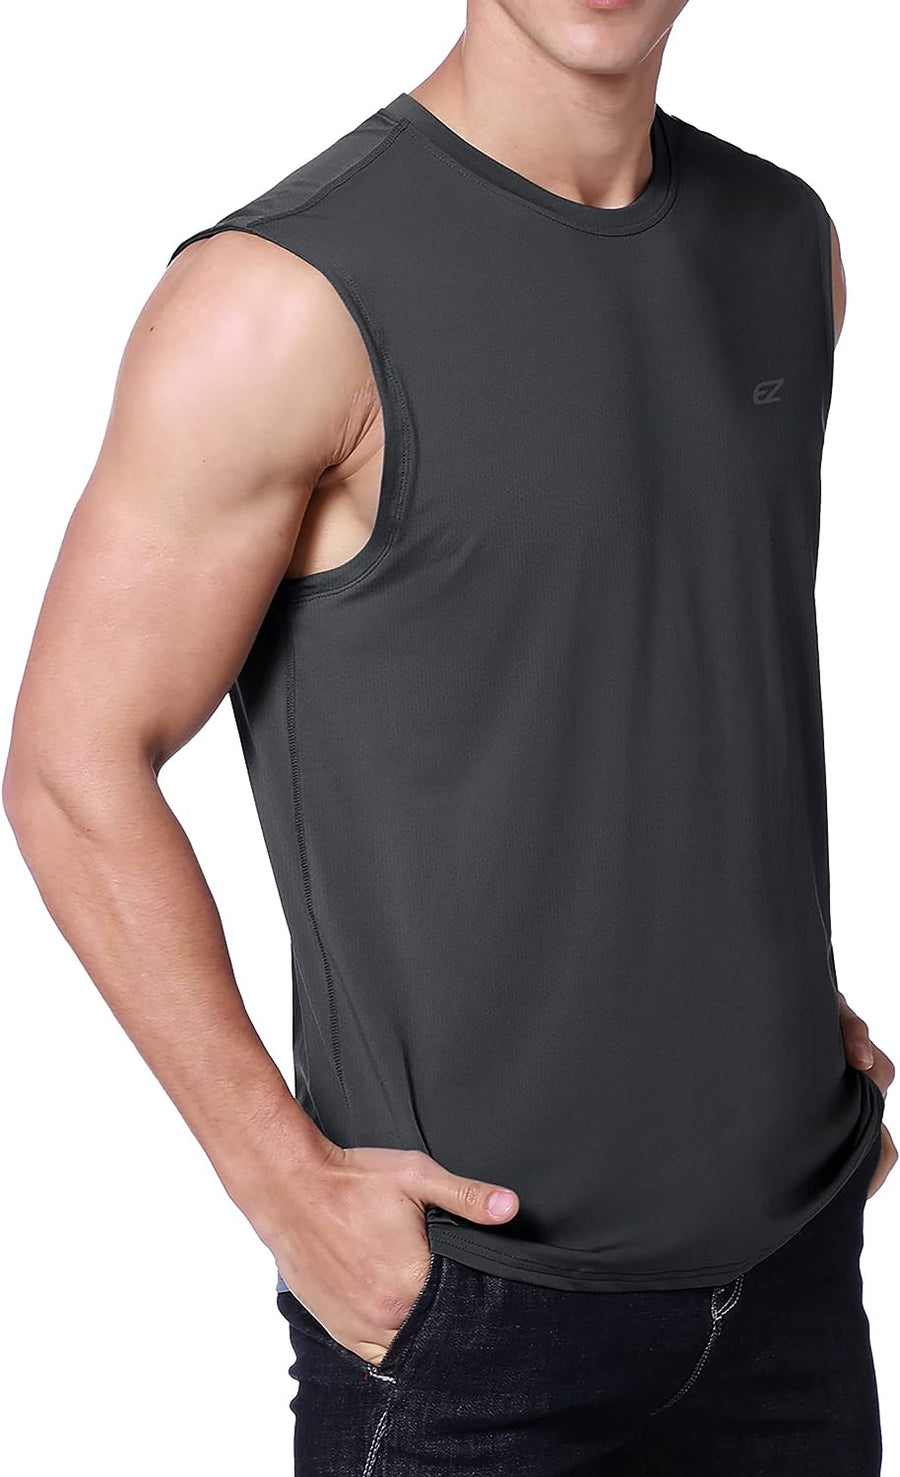 Sleeveless Quick-Dry Workout Muscle Bodybuilding Tank Top